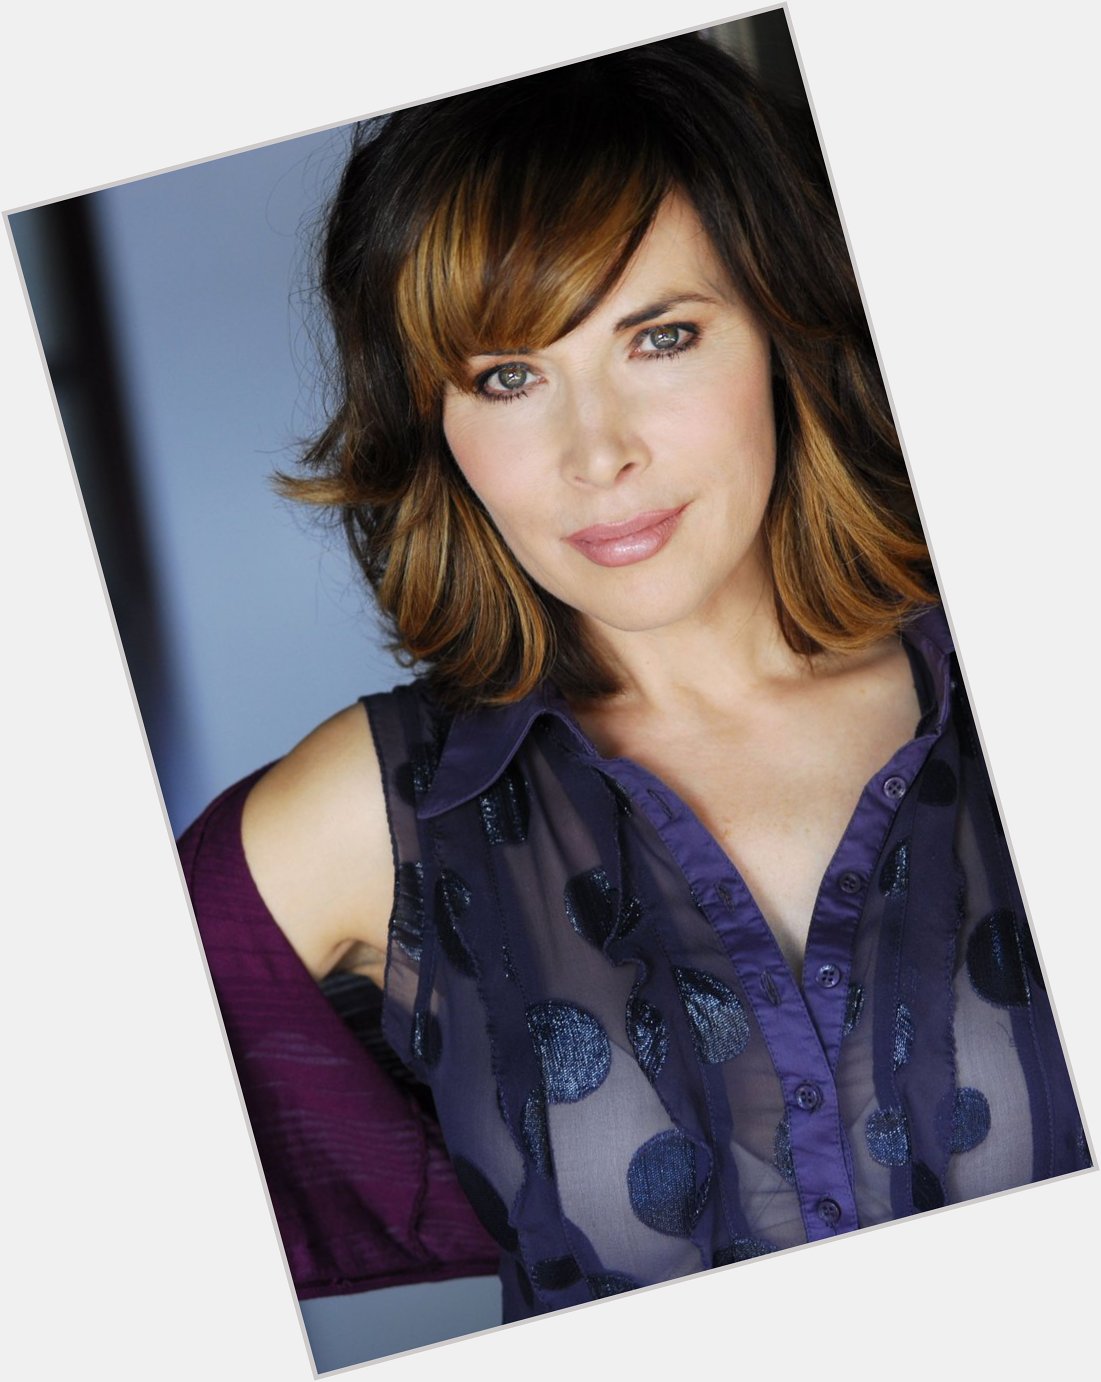 This 1 is for my soap opera followers. Happy Birthday to LAUREN KOSLOW who plays Kate Roberts on Days of our Lives 